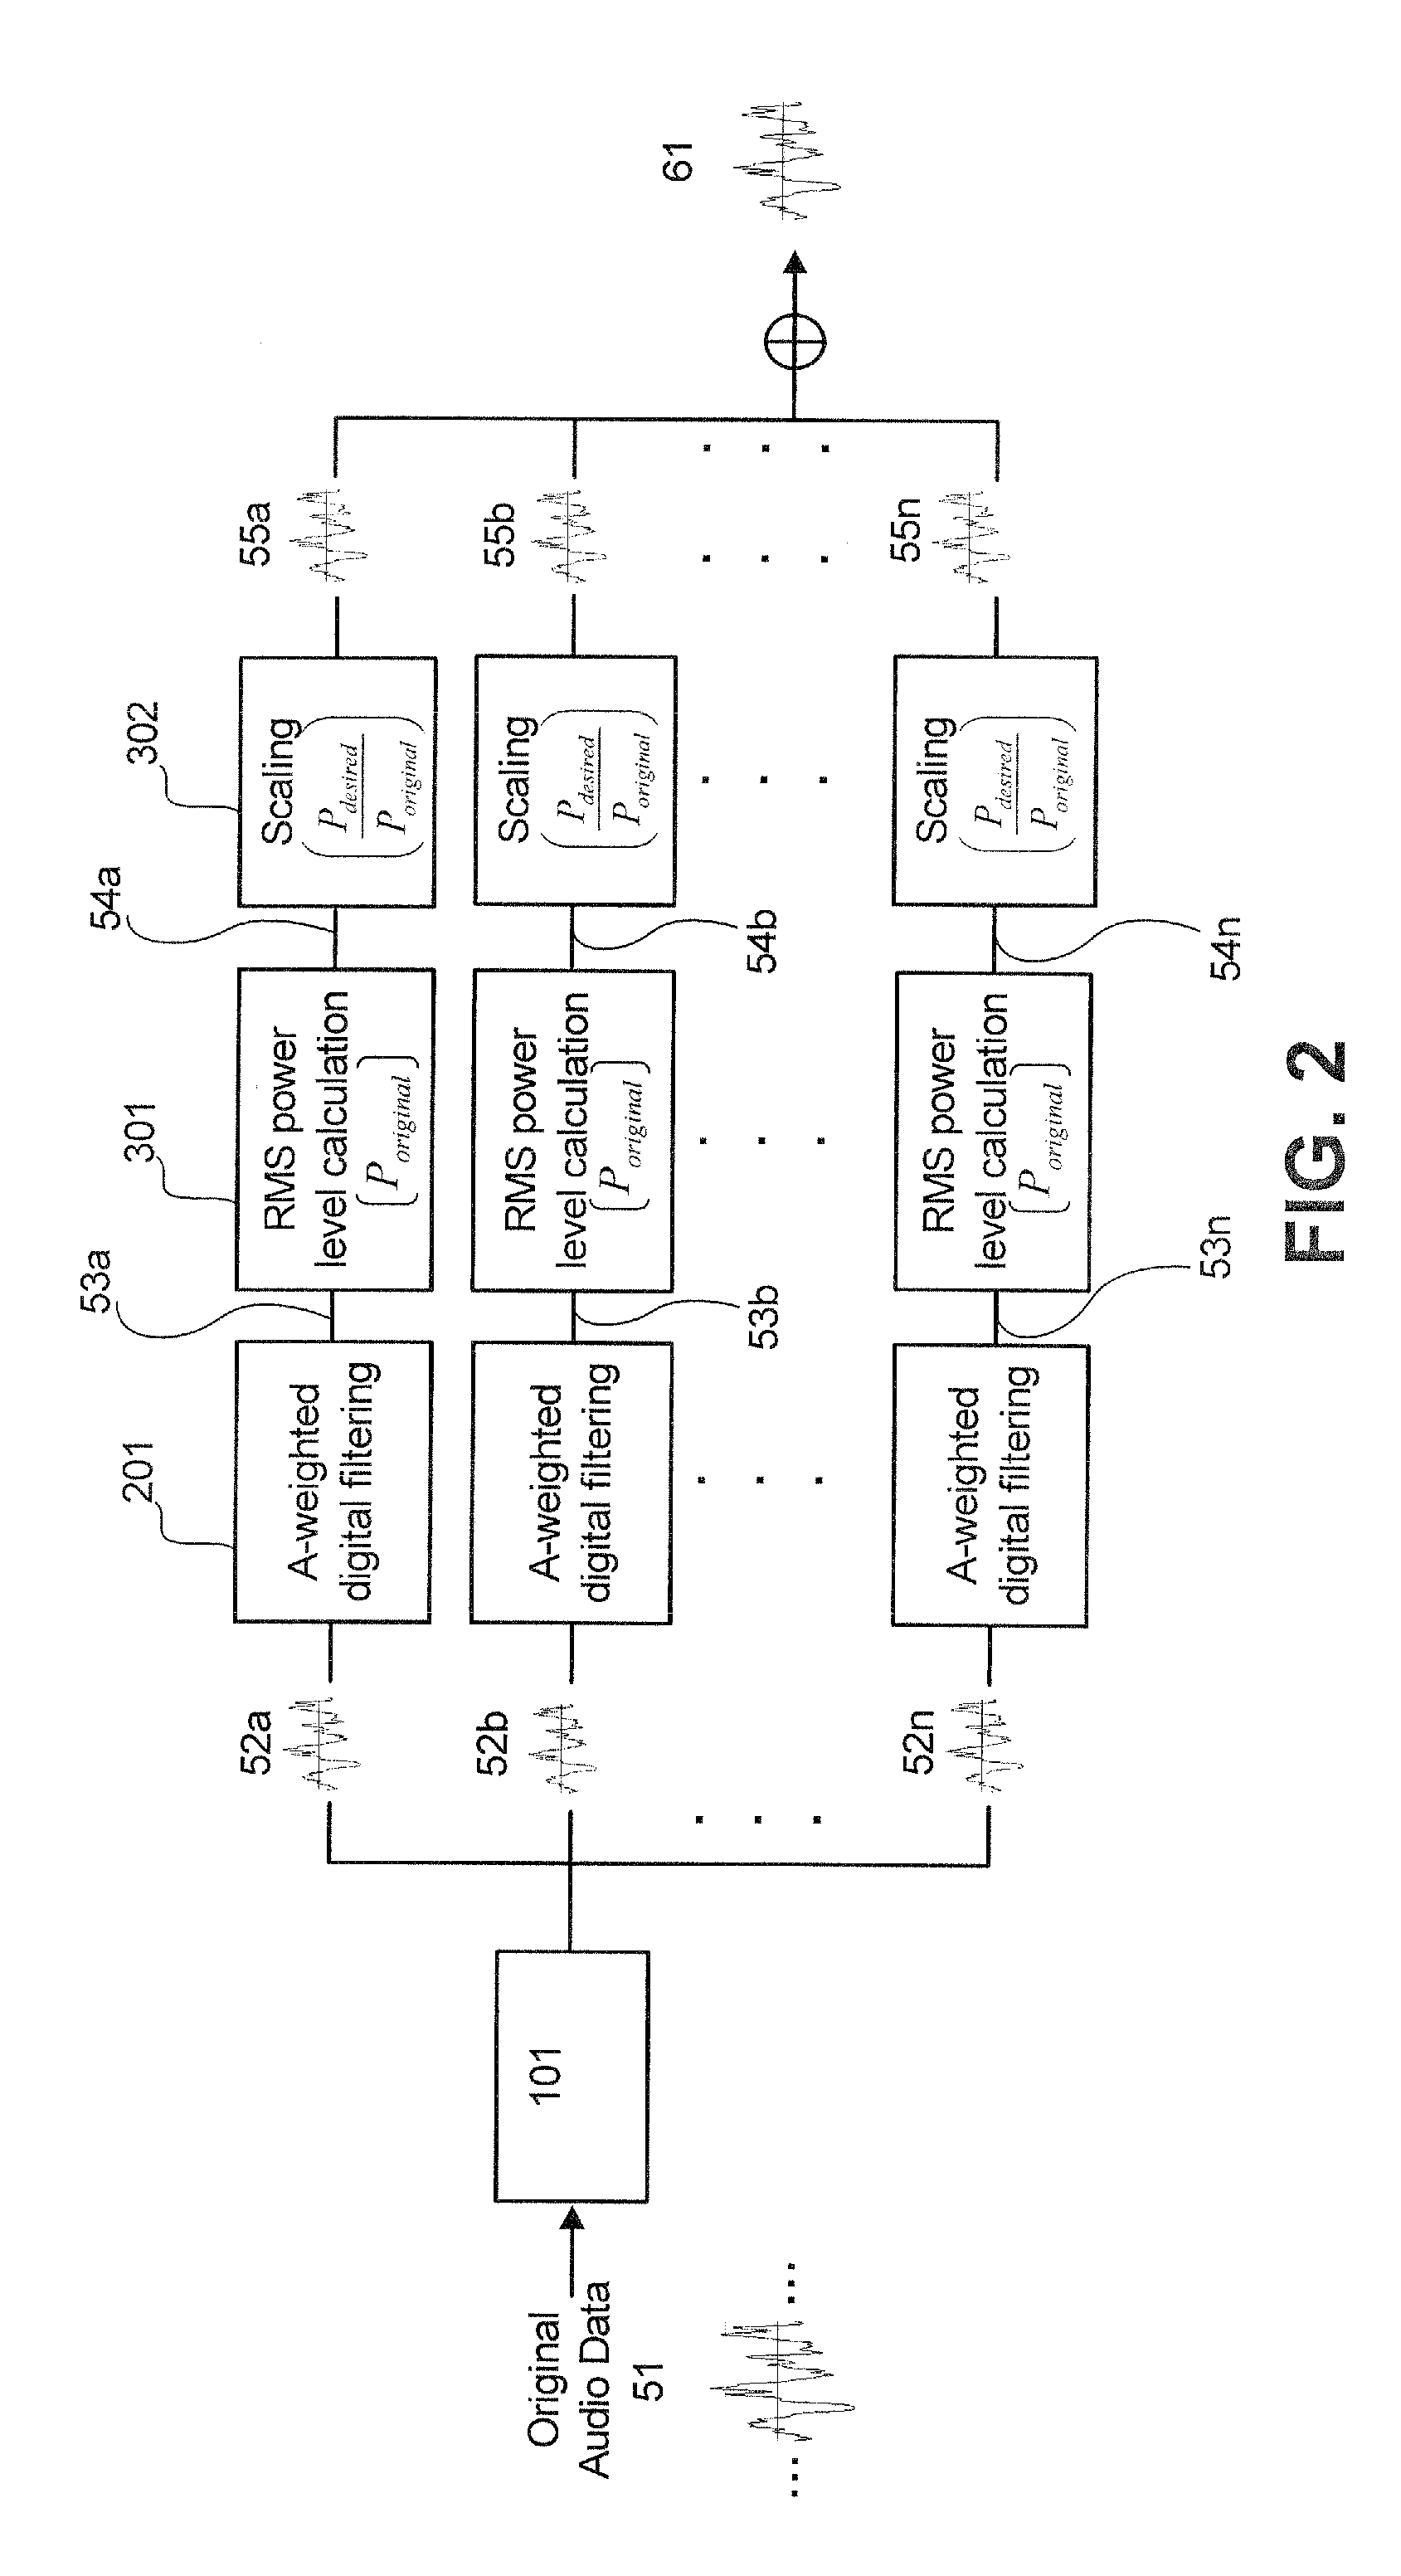 Digital sound leveling device and method to reduce the risk of noise induced hearing loss